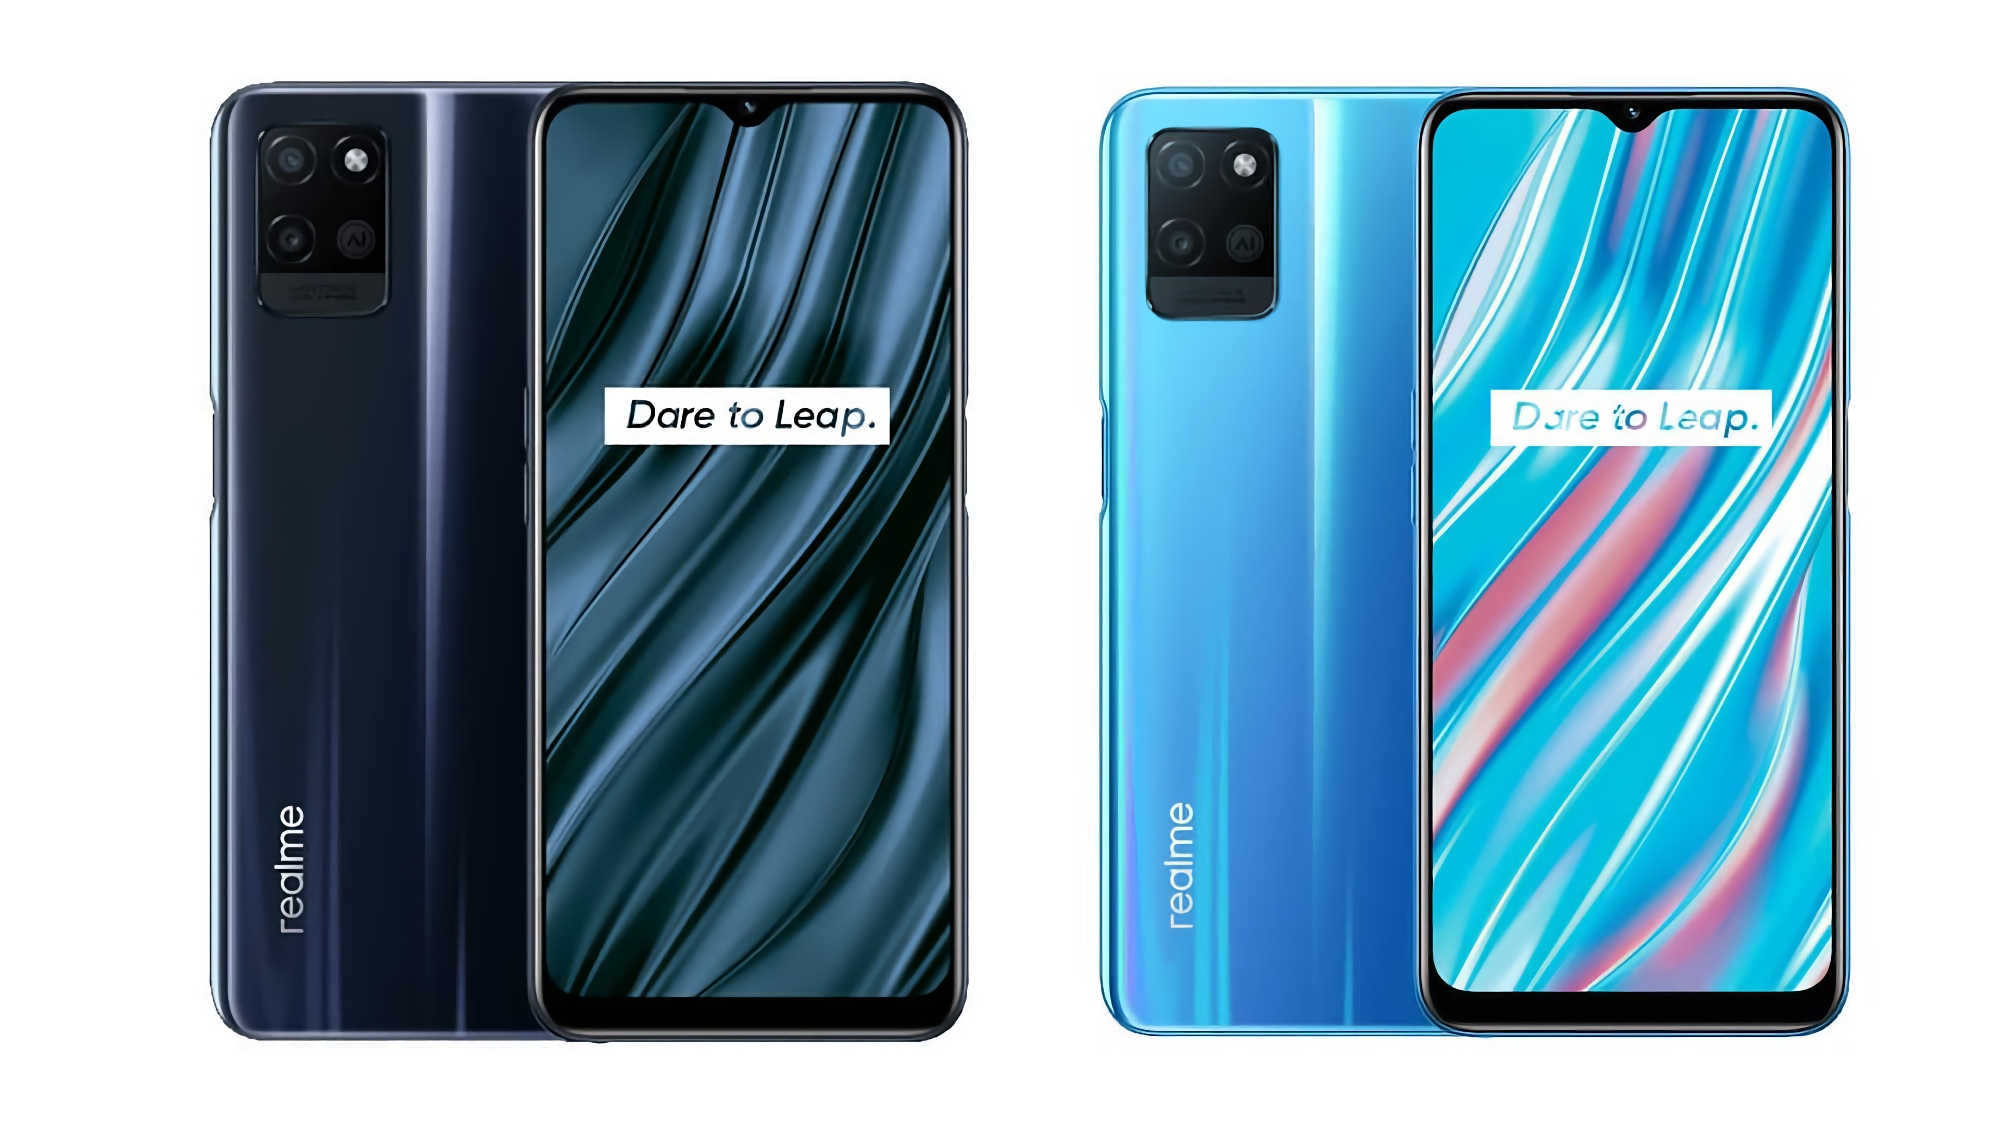 Insider: Realme prepares to release new budget smartphone with HD+ screen and MediaTek Dimensity 810 chip